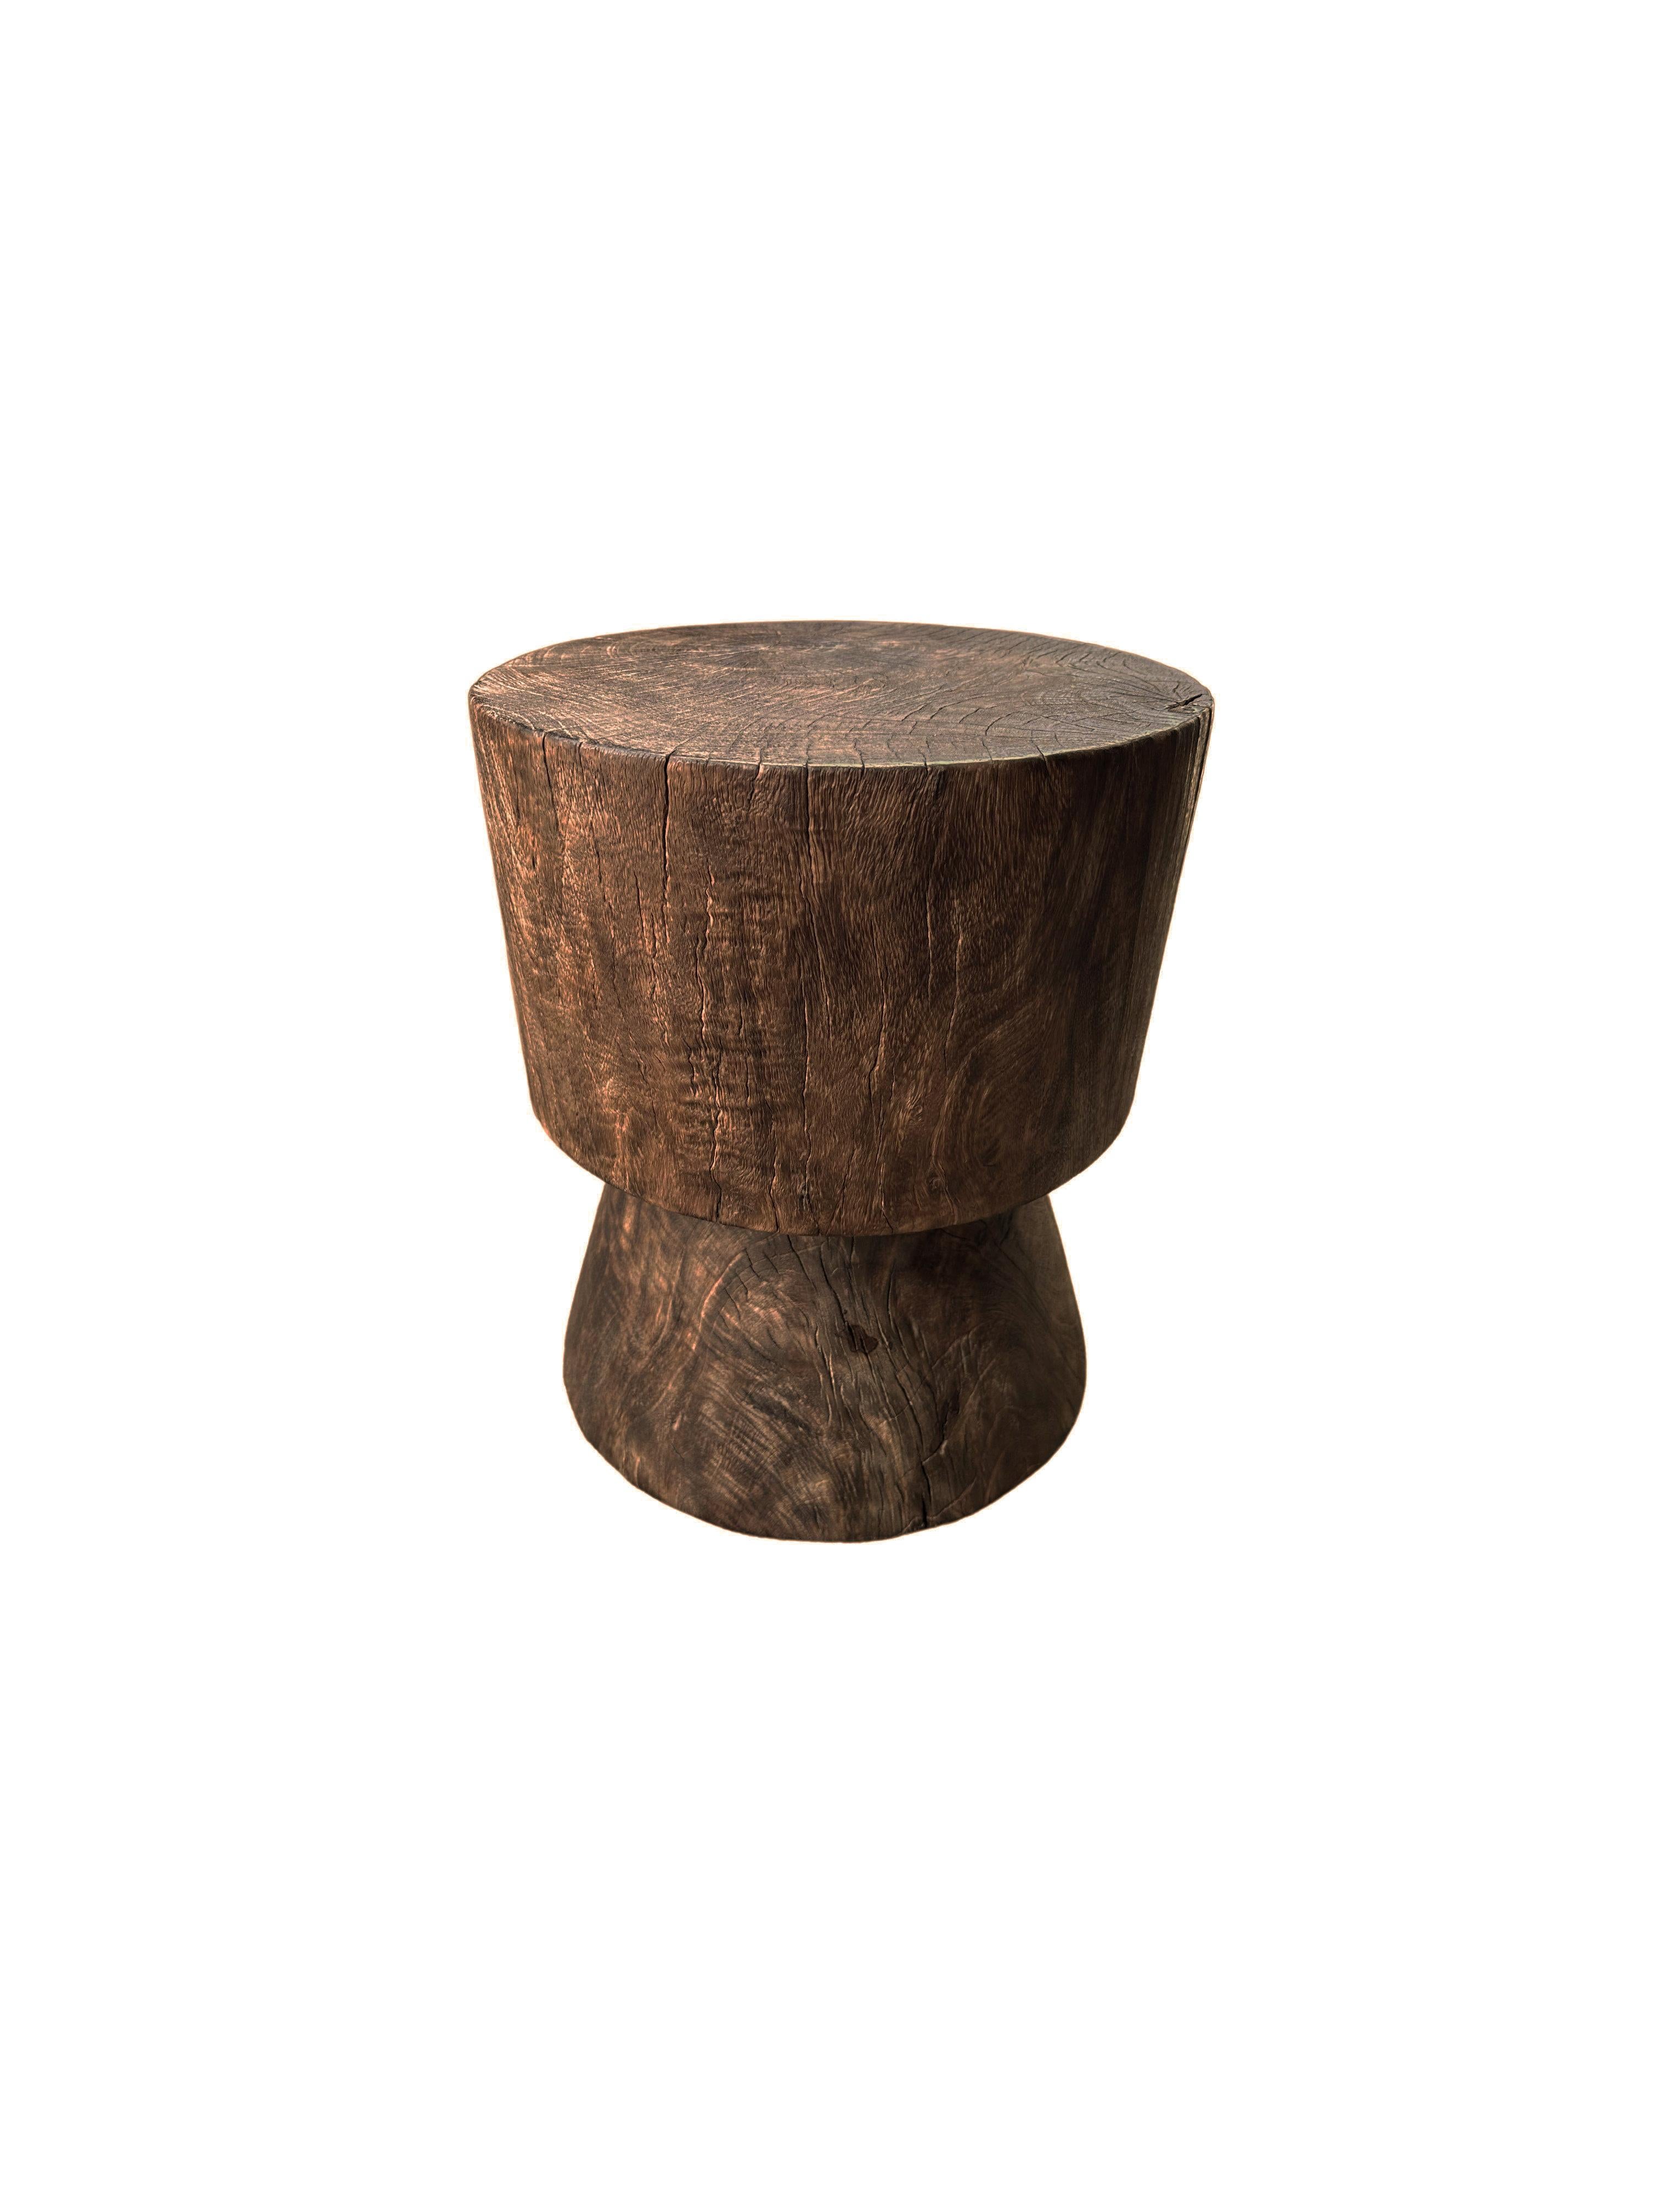 Hand-Crafted Solid Mango Wood Side Table with Espresso Finish, Modern Organic For Sale